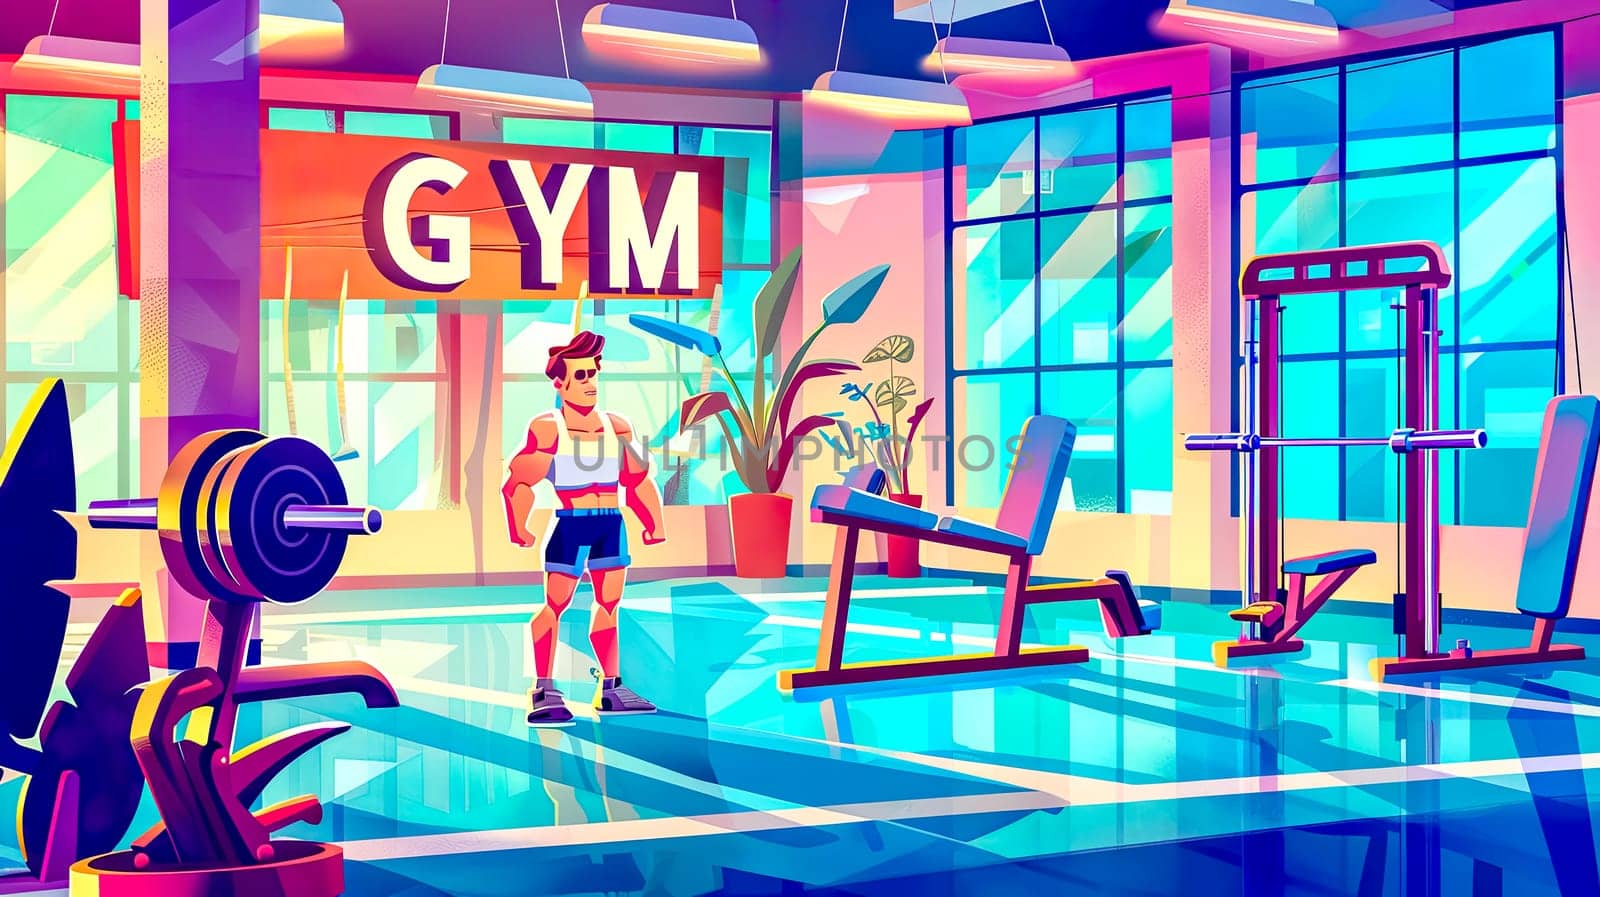 Fit man stands confidently in a vibrant, modern gym, preparing for a workout